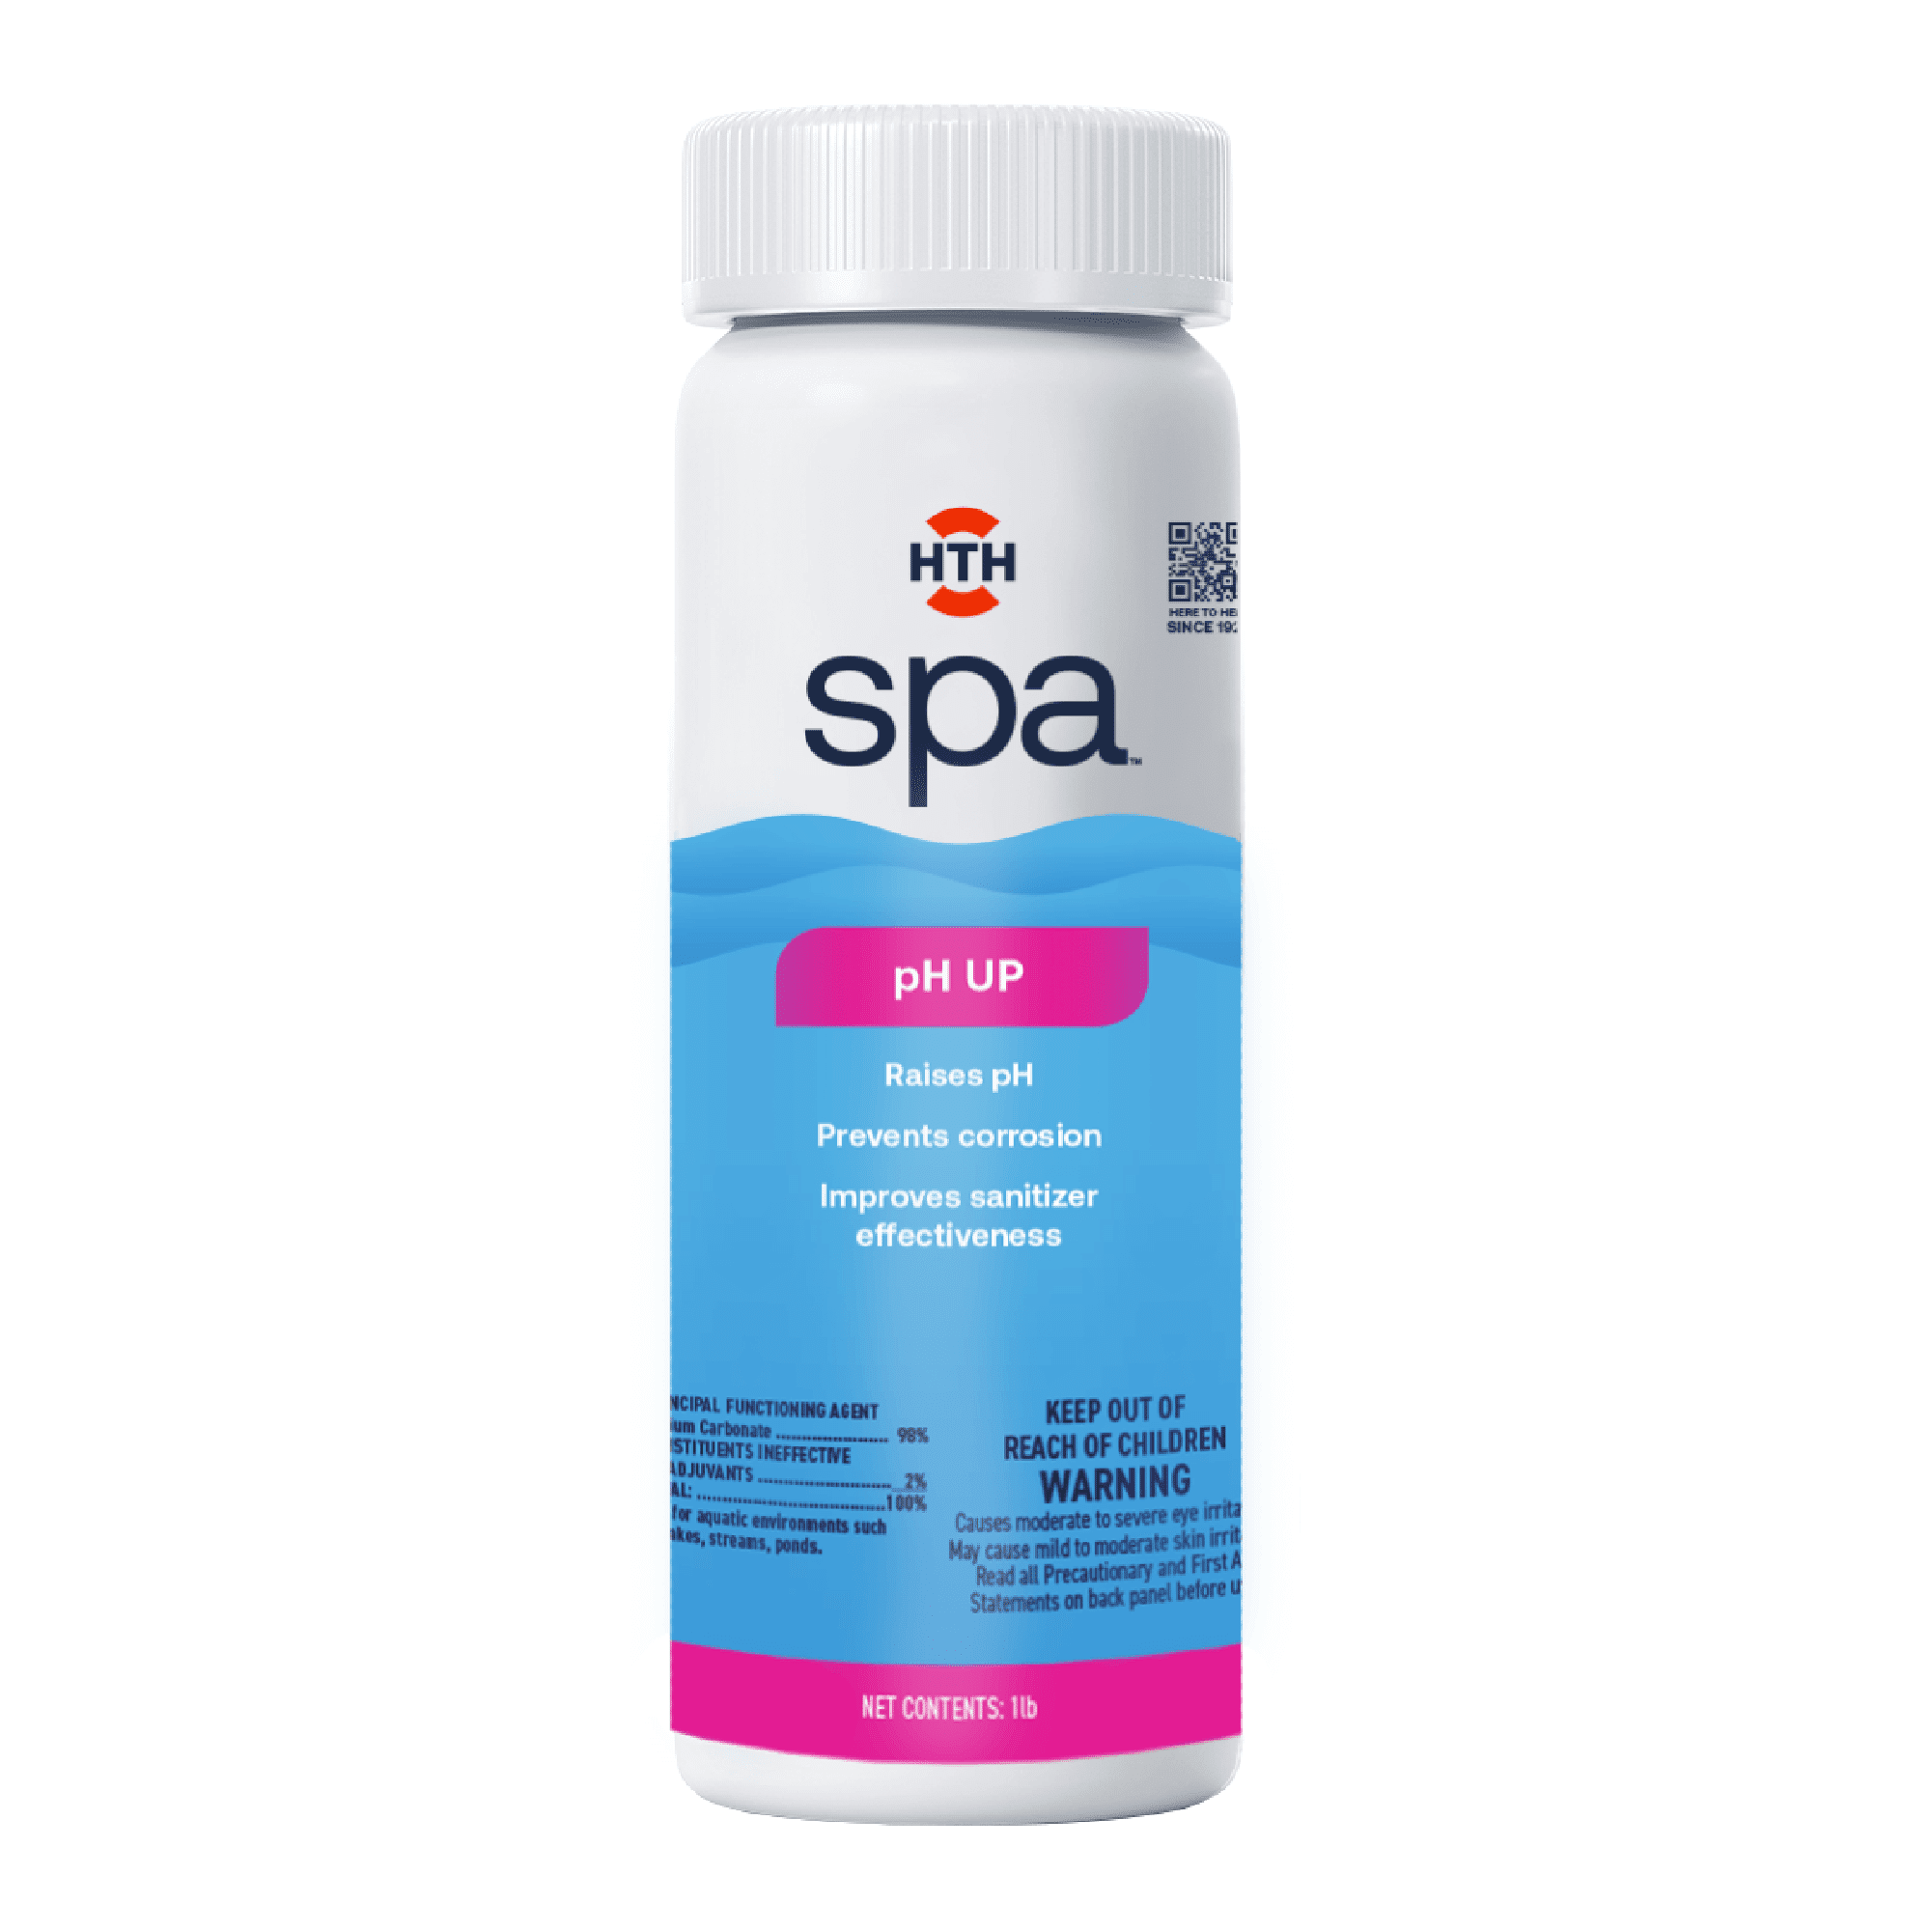 HTH Spa pH up, Increases pH for Spas & Hot Tubs, 2lb (Pool Chemicals)